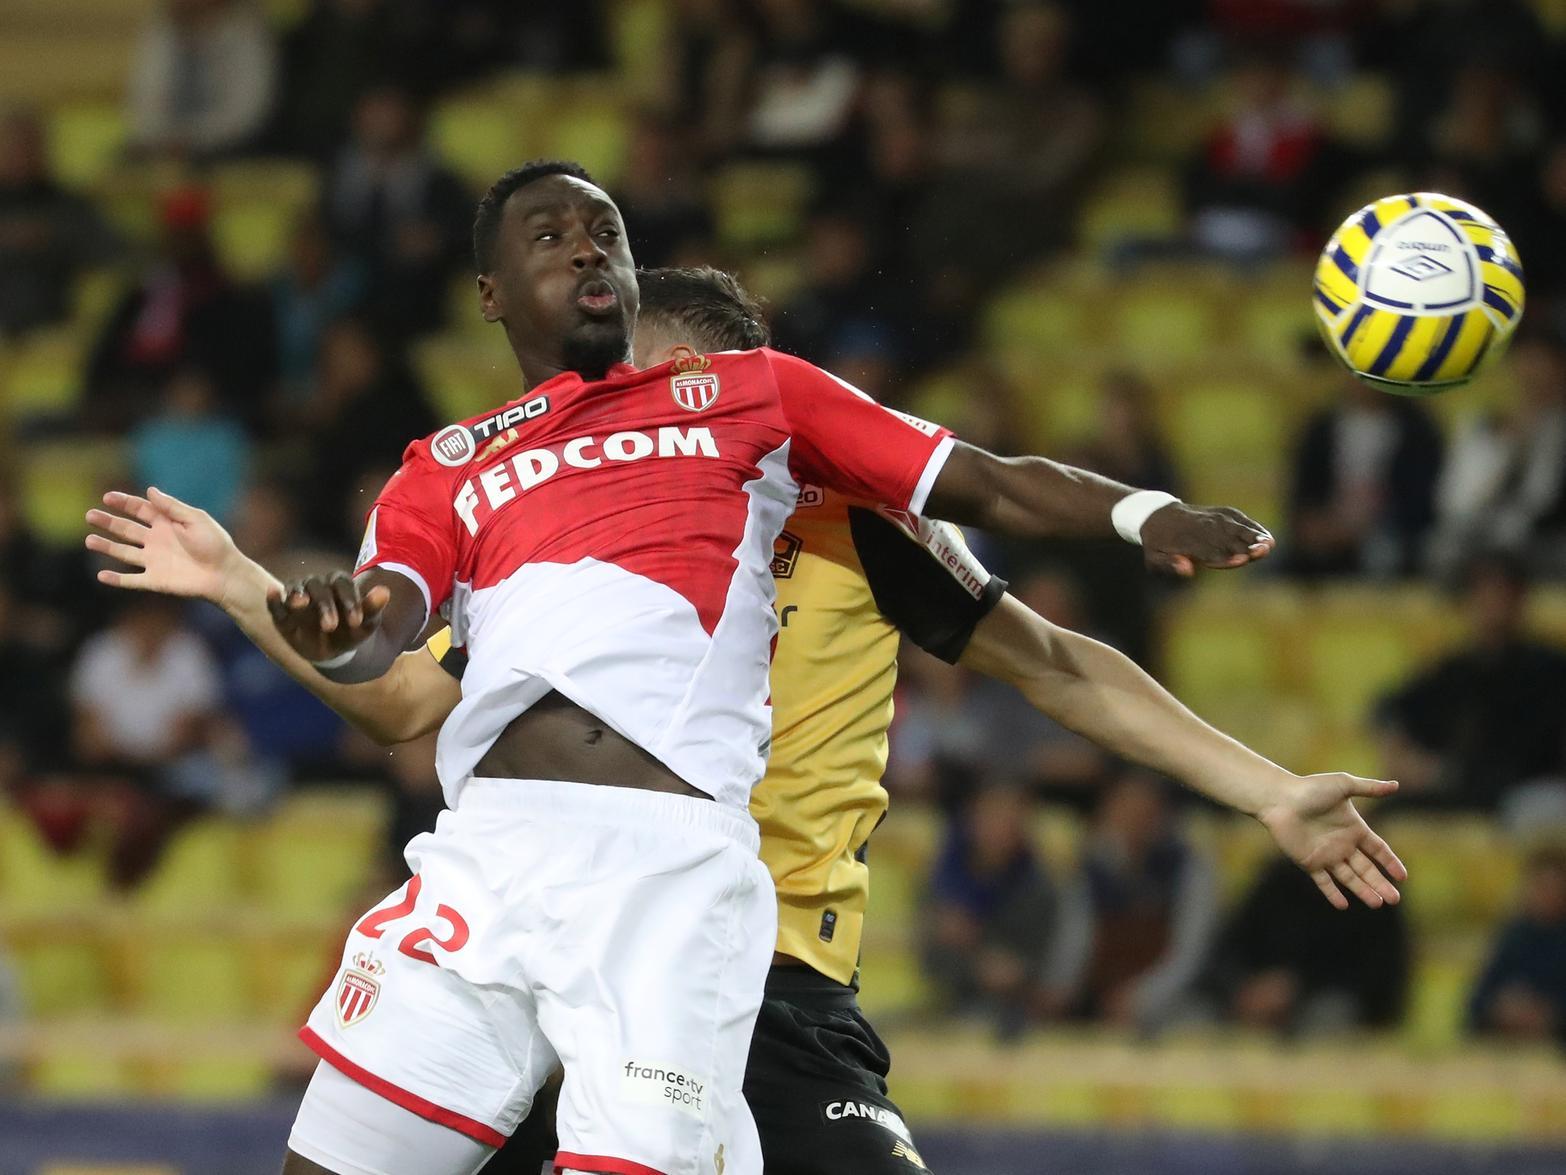 Leeds United will move for 12m RB Leipzig striker Jean-Kevin Augustin if a move for Che Adams doesnt come off. He is currently on-loan at Monaco. (The Athletic)